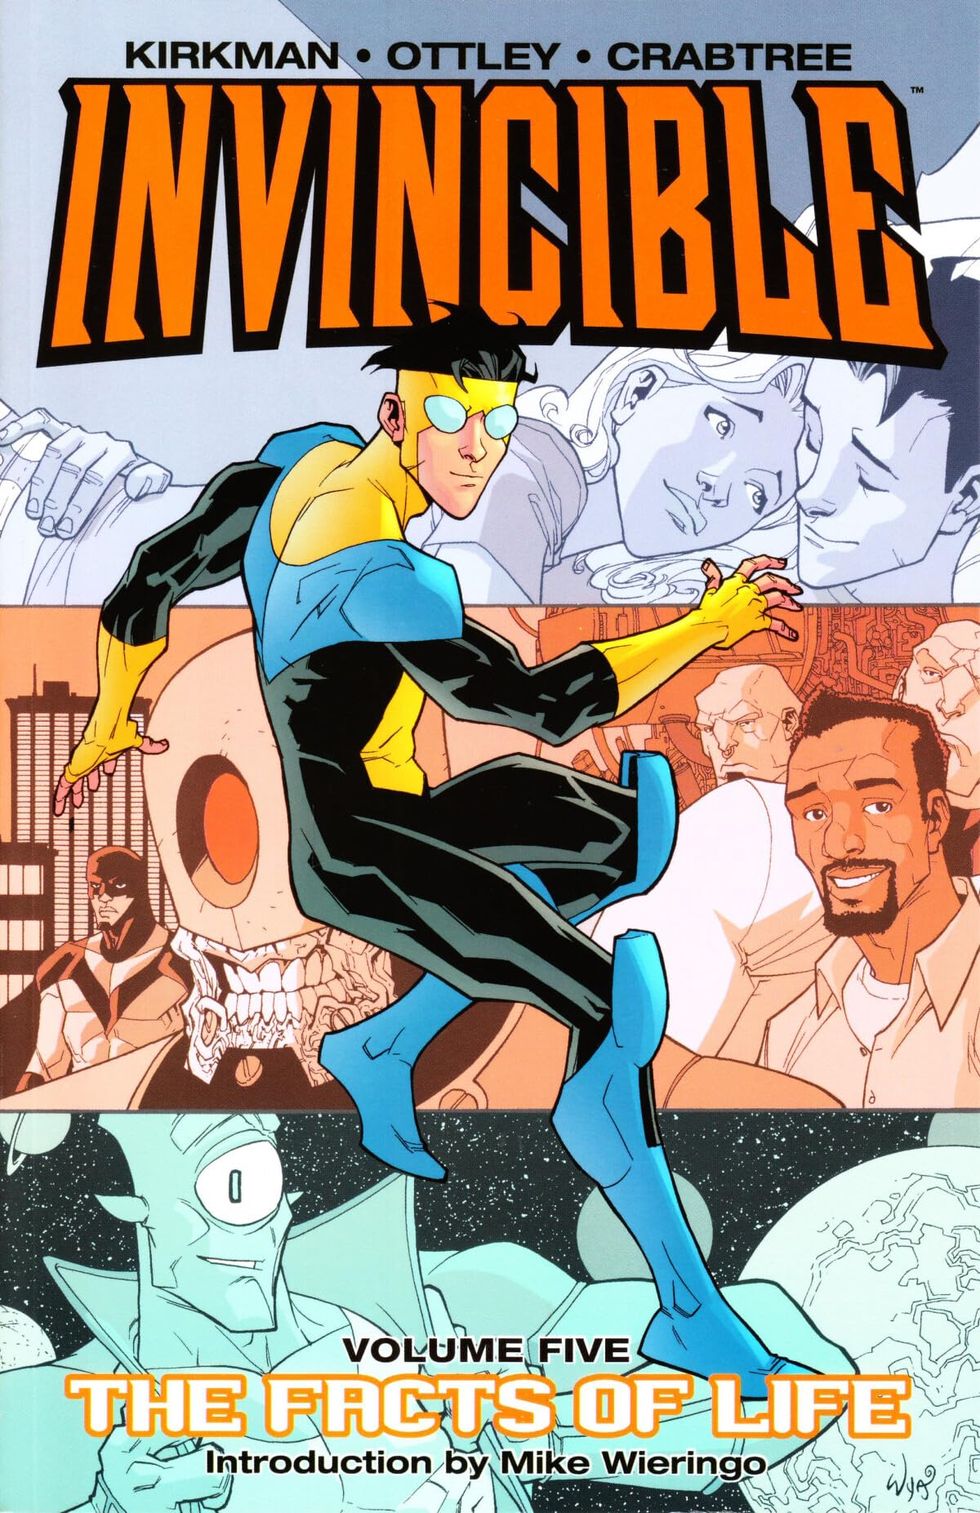 Invincible Book 5: The Facts of Life